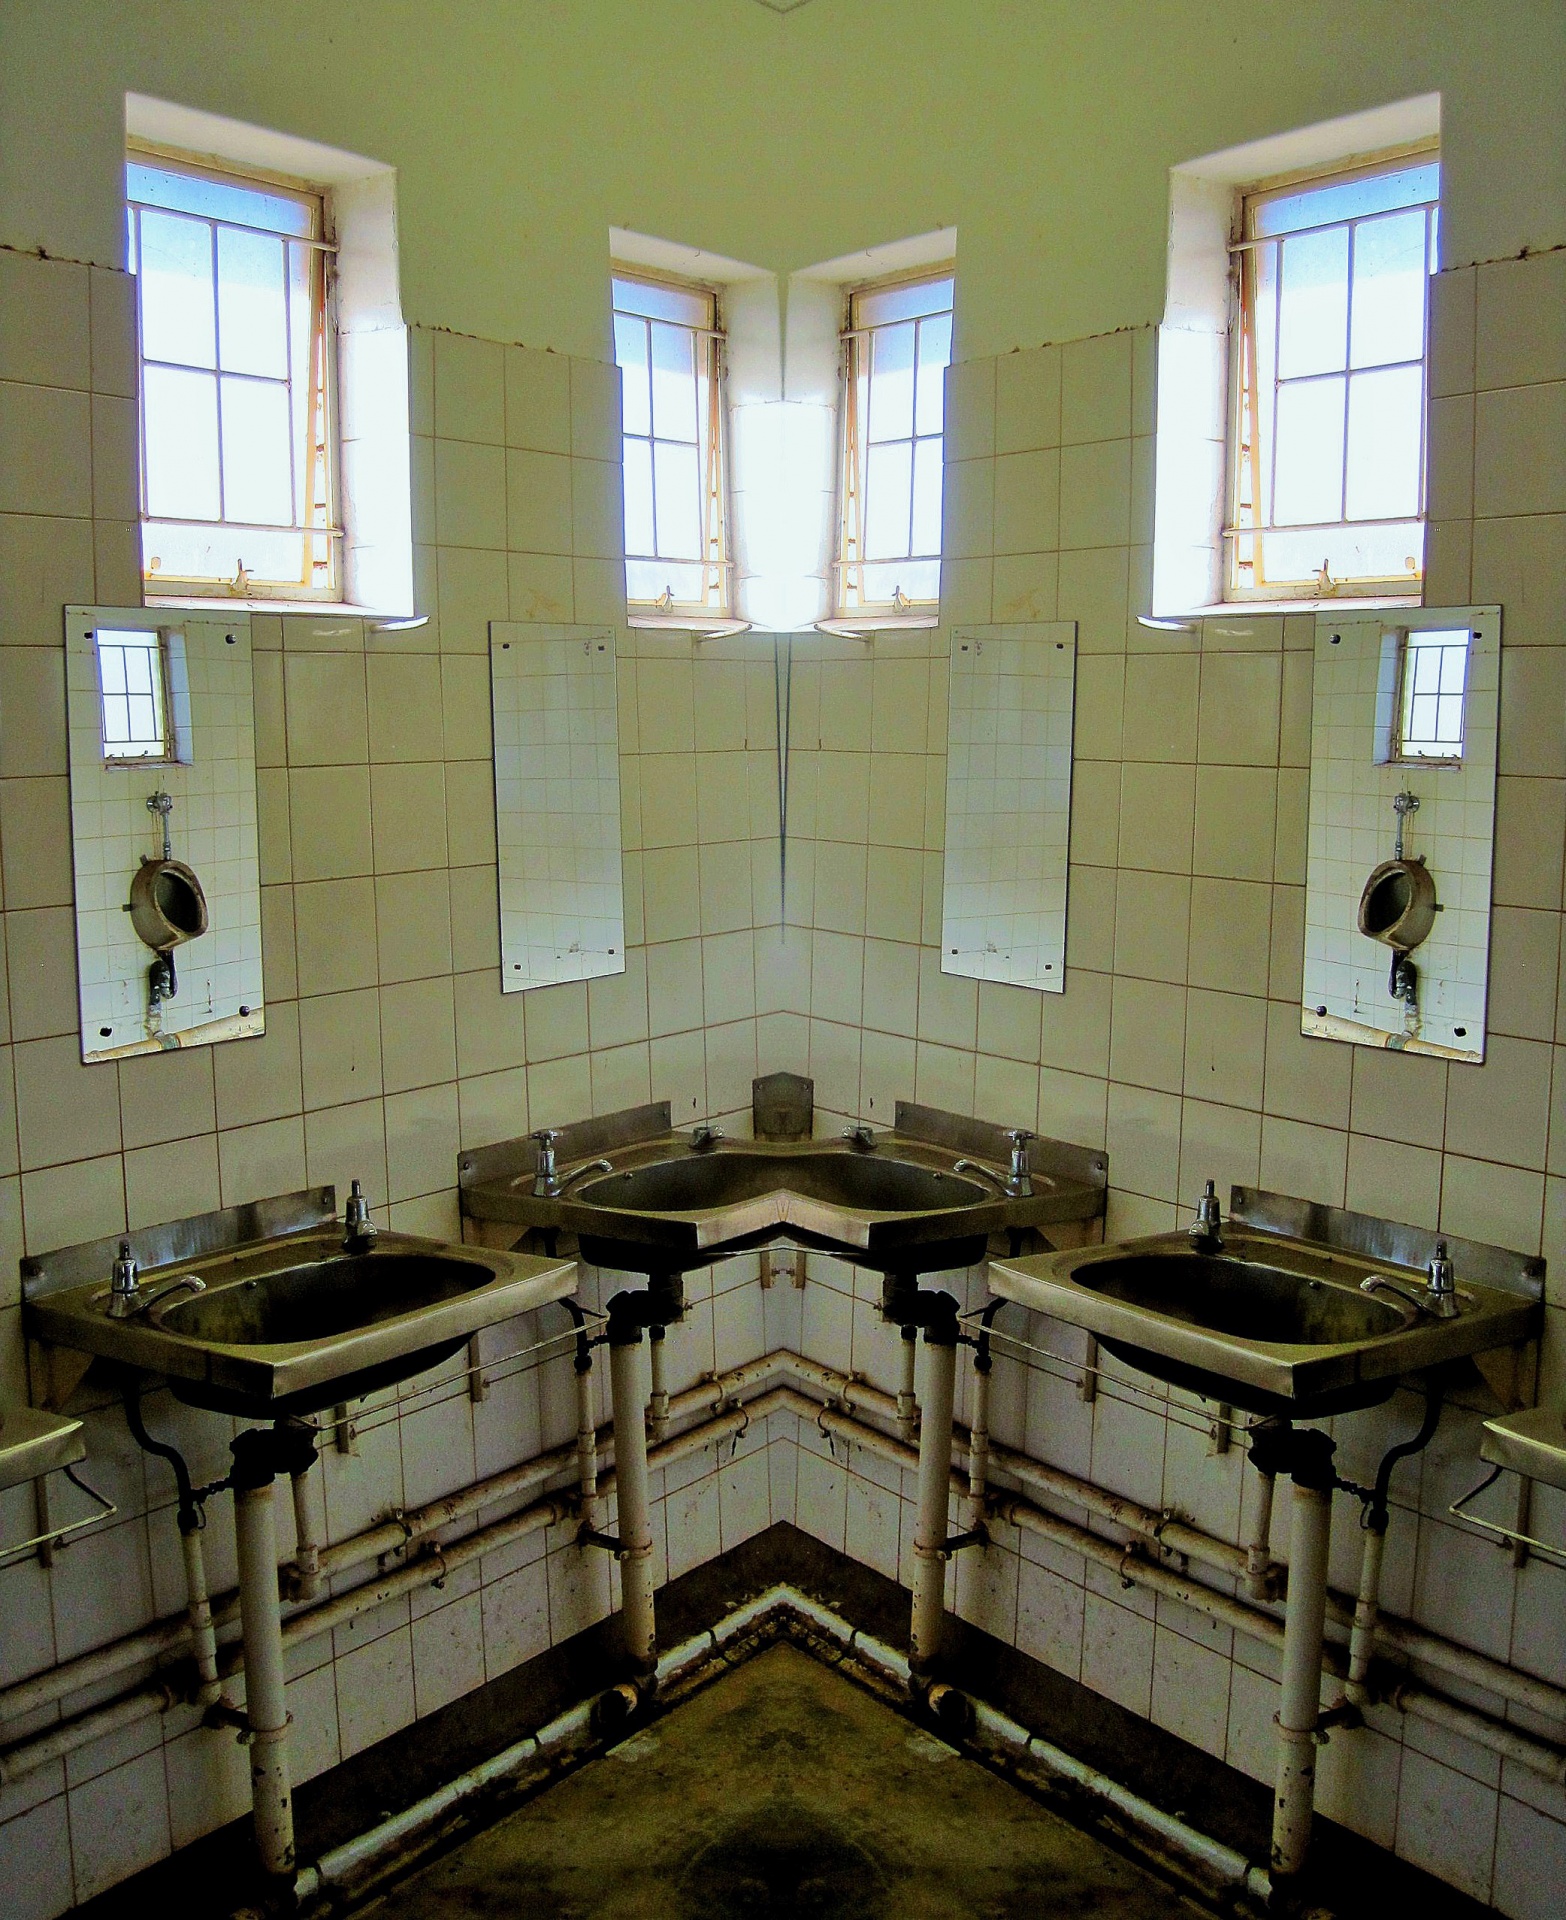 the corner with basins reflected